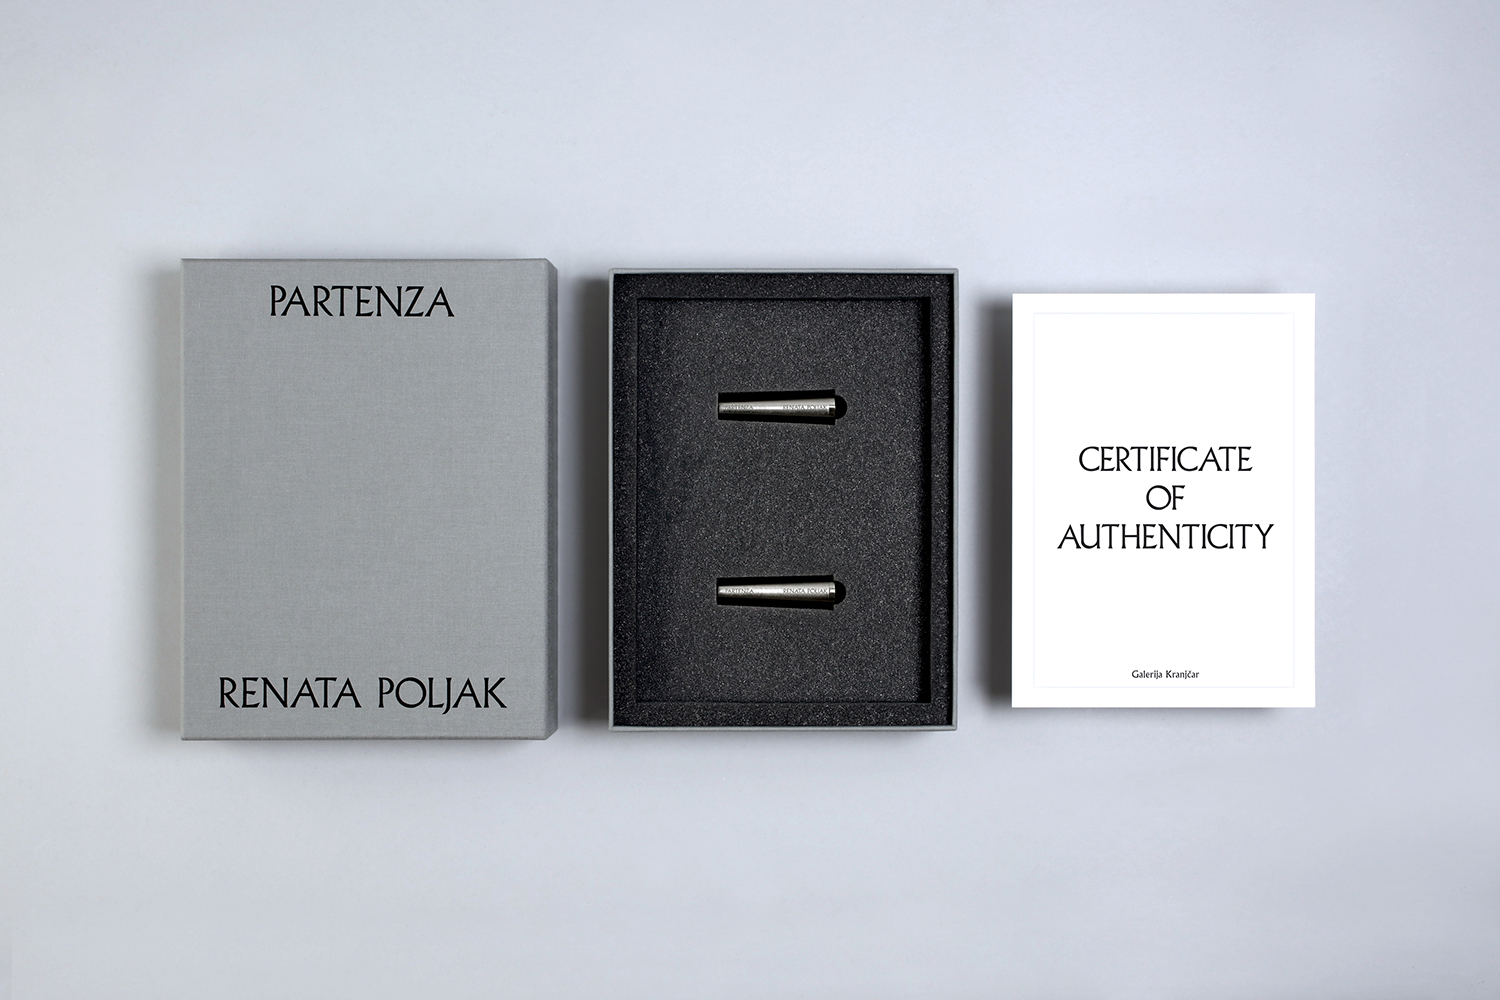 Limited edition packaging by Bunch for Partenza by Renata Poljak